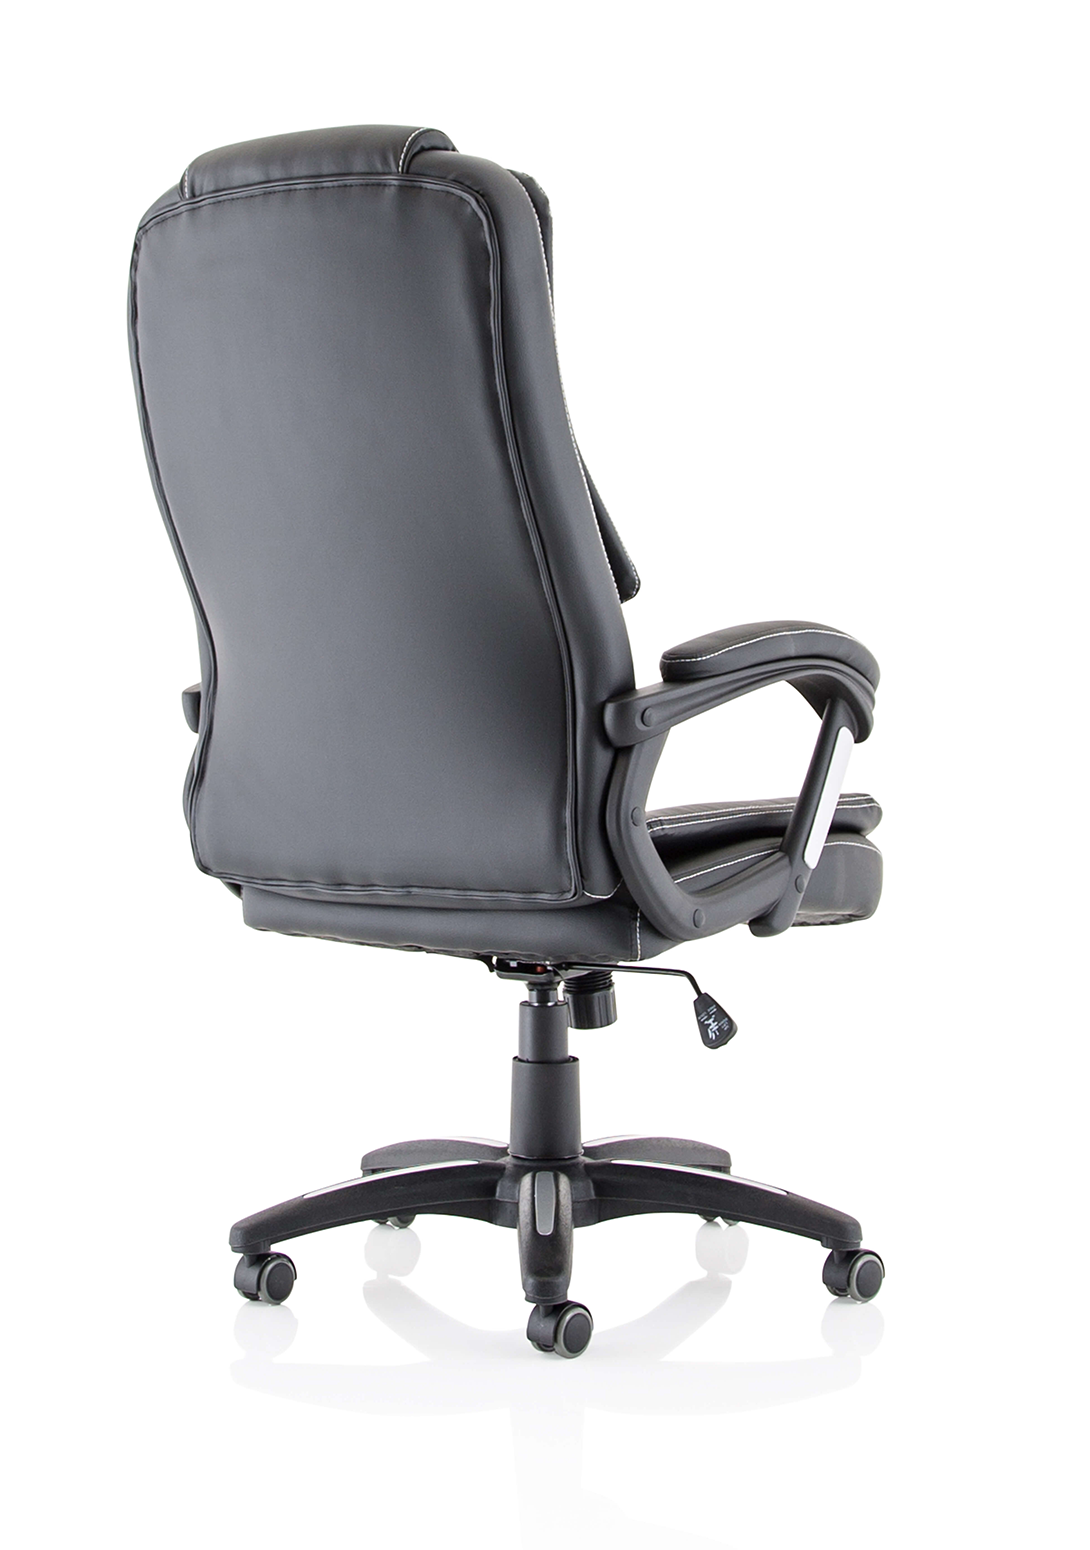 Dakota Exec Home Office Chair | Executive Chair | Home Office Furniture | Swivel Chair | Soft Padded Chair | Black Home Office Chair